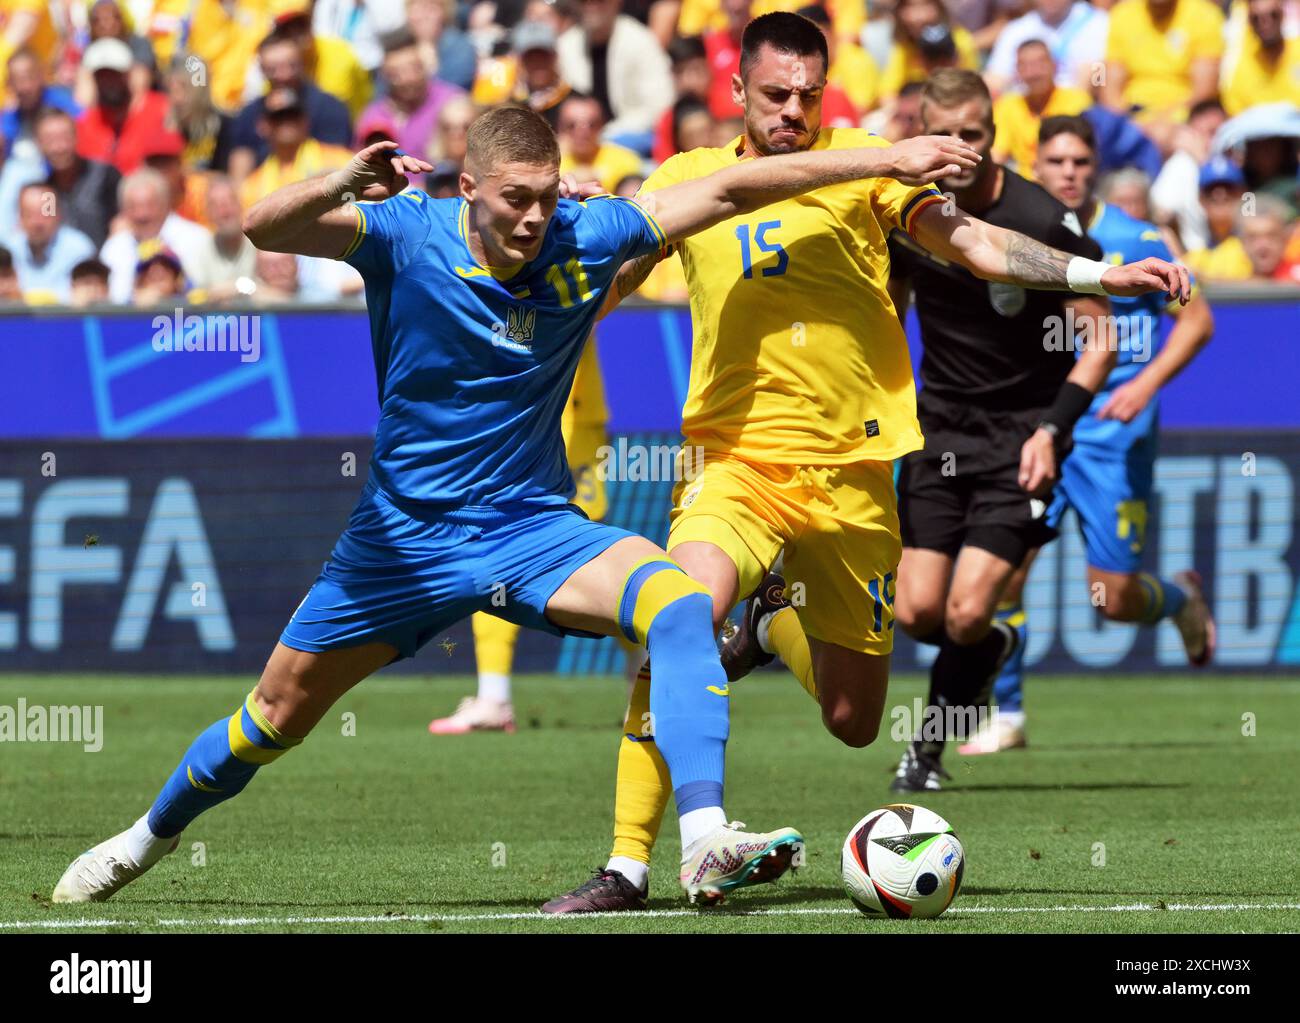 Munich, Germany. 17th June, 2024. Soccer, UEFA Euro 2024, European Championship, Romania - Ukraine, Preliminary round, Group E, Matchday 1, Munich Football Arena, Artem Dowbyk (l) of Ukraine and Romania's Andrei Burca fight for the ball. Credit: Peter Kneffel/dpa/Alamy Live News Stock Photo